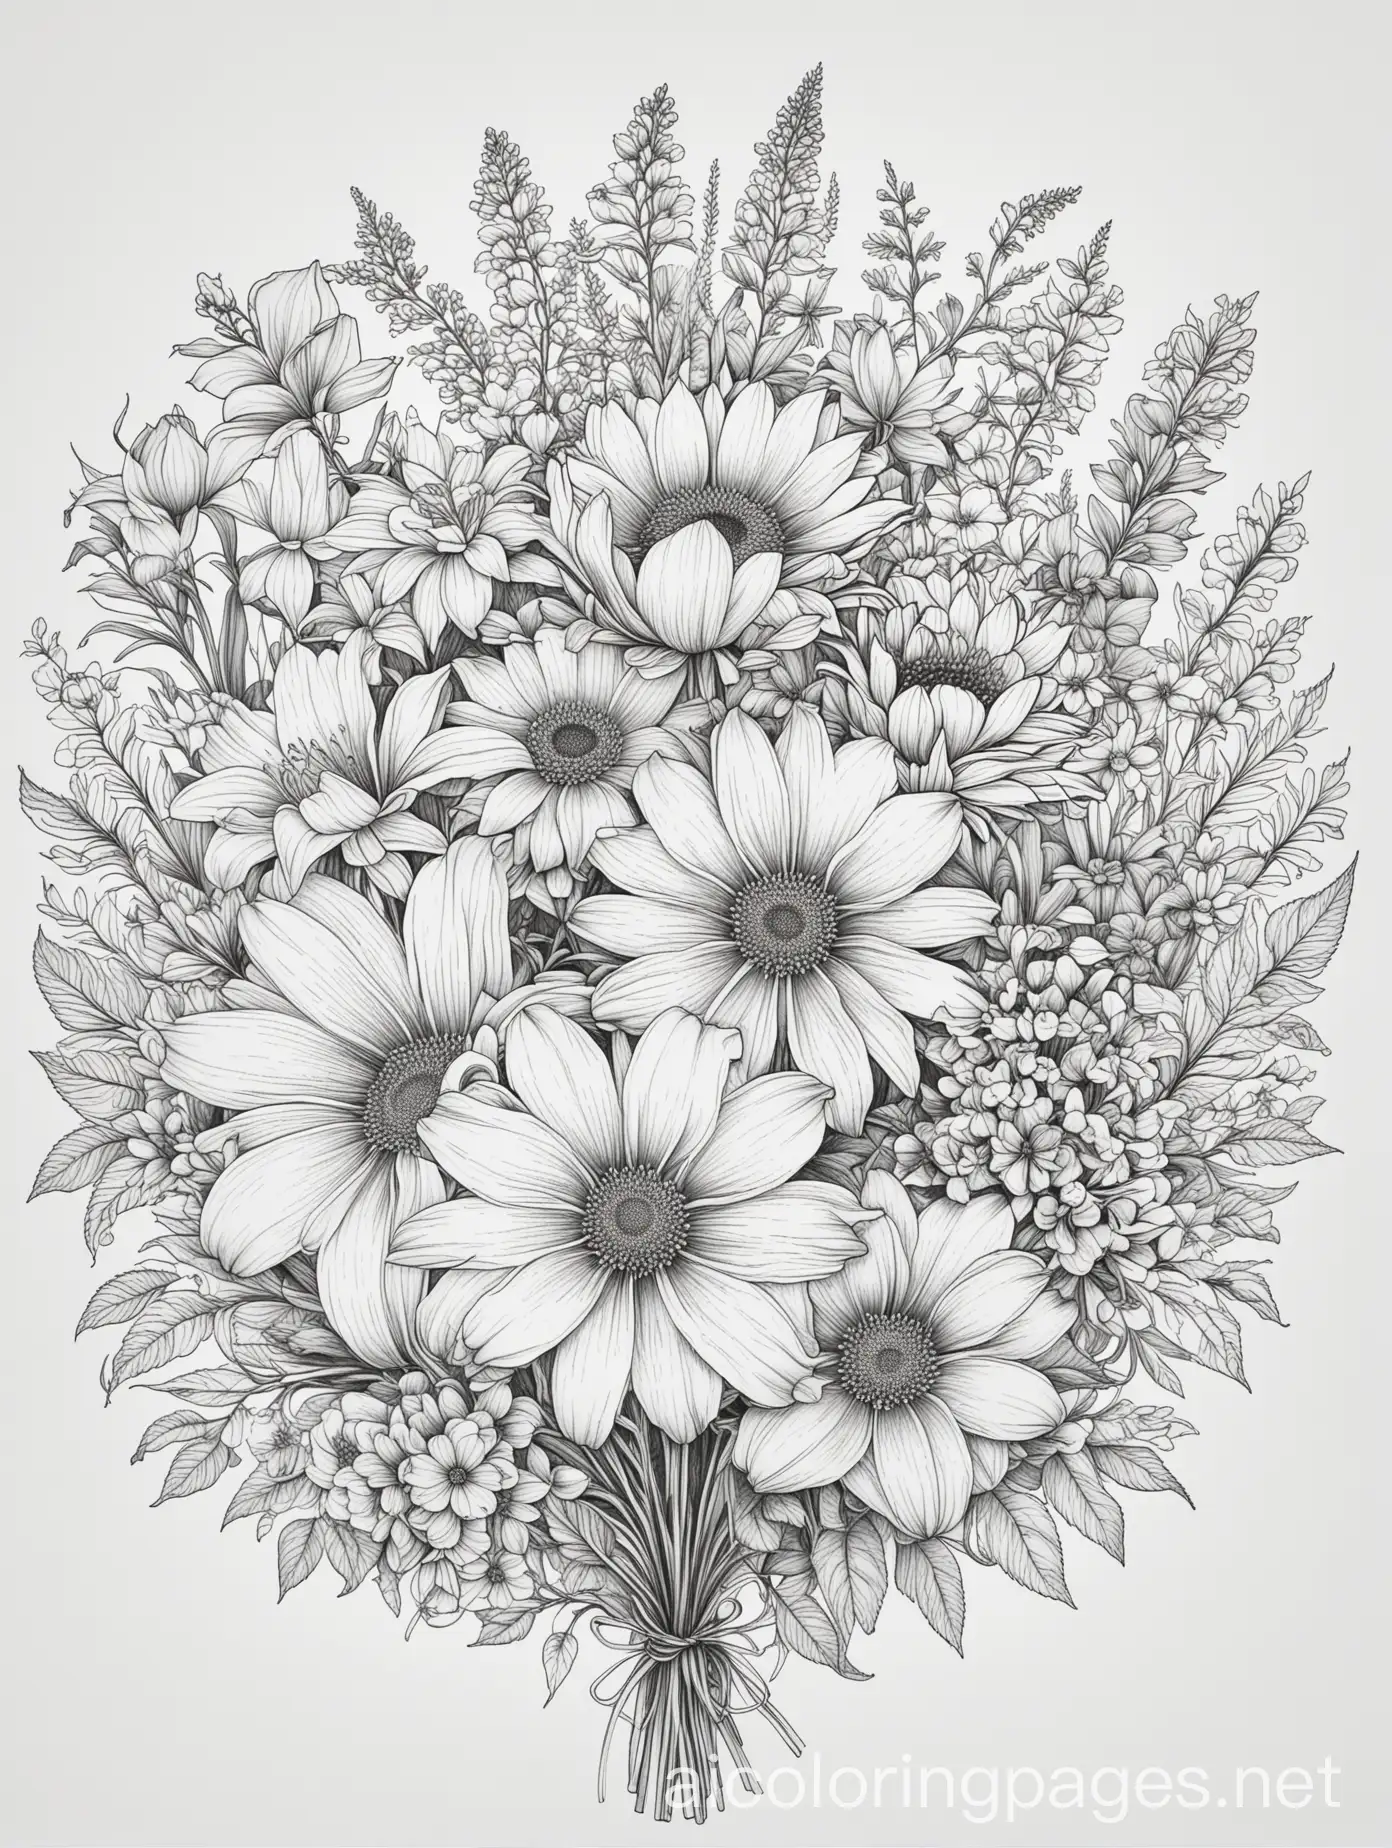 beautiful bouquet of  diverse flowers, Coloring Page, black and white, line art, white background, Simplicity, Ample White Space. The background of the coloring page is plain white to make it easy for young children to color within the lines. The outlines of all the subjects are easy to distinguish, making it simple for kids to color without too much difficulty